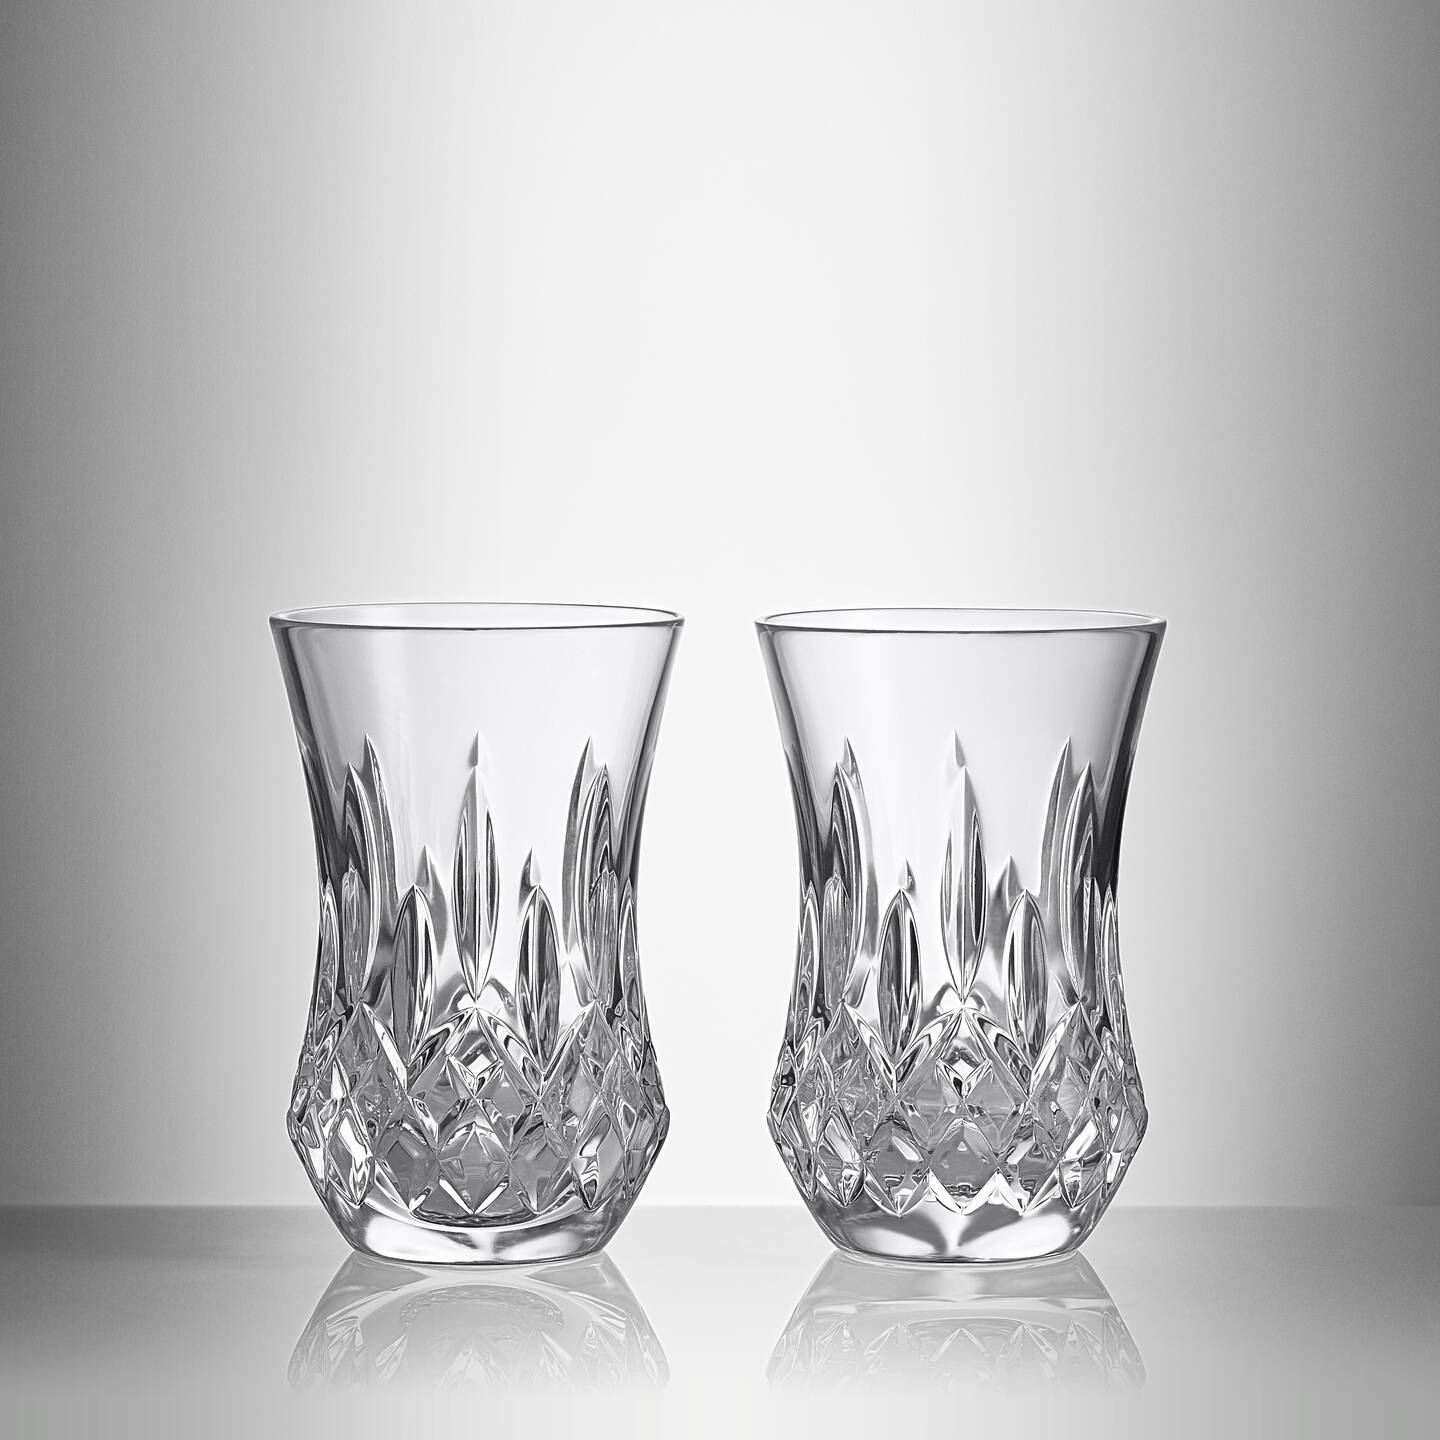 How To Set The Dining Table With Glassware - Waterford®